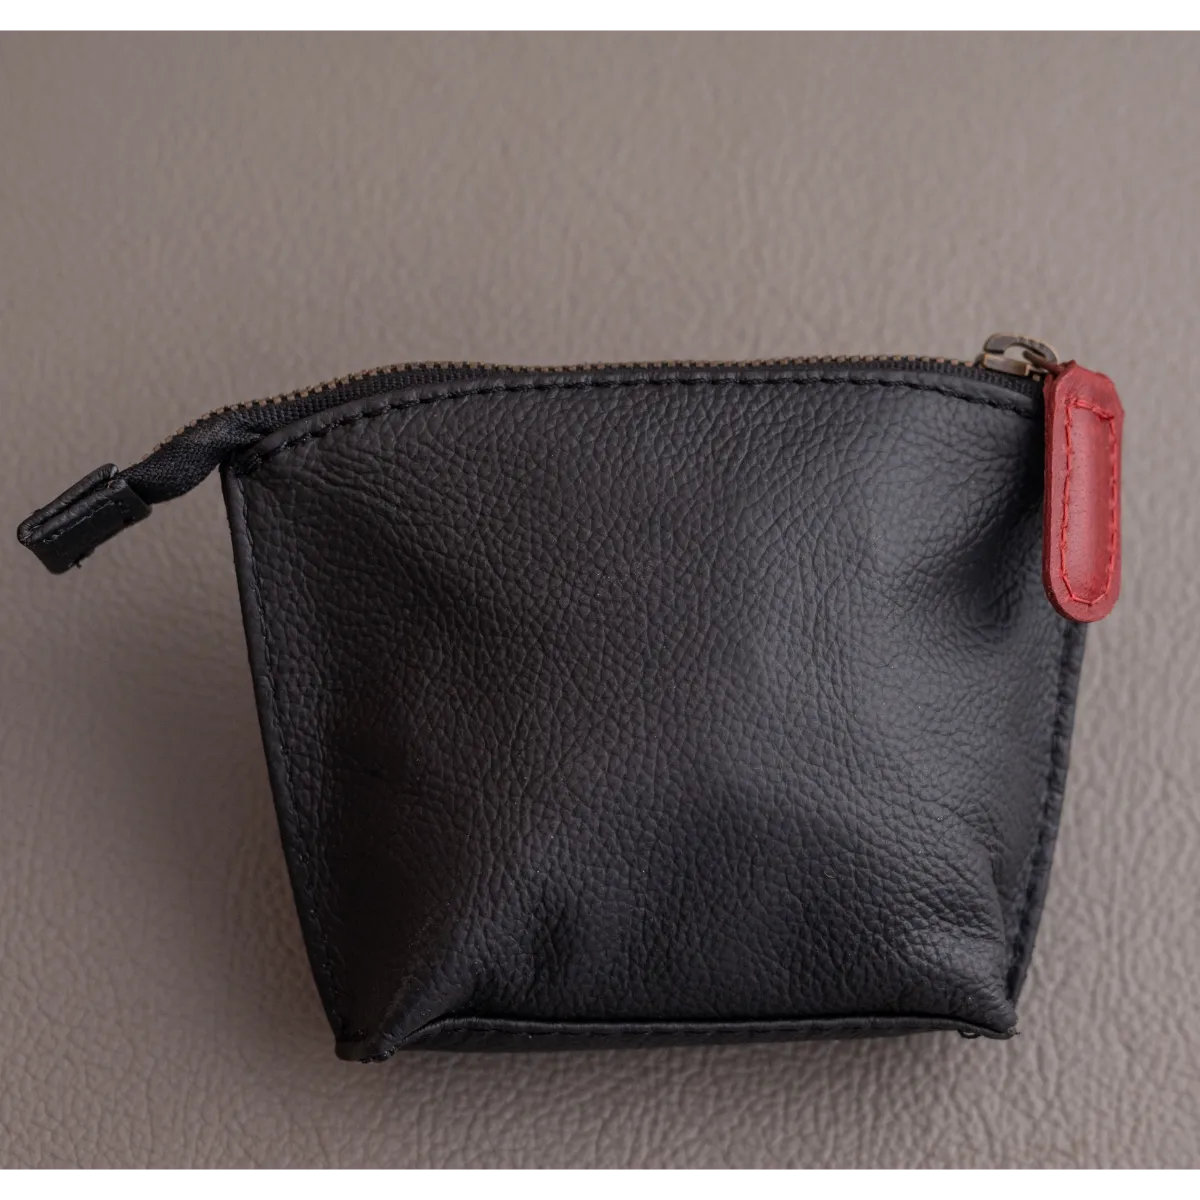 Buy Leather Coin Purse for Women, Coin Credit Card Key Chain Money Holder  Pouch Mini Zipper Wallet Bag Black Earphone Change Purse for Girl Ladies at  Amazon.in